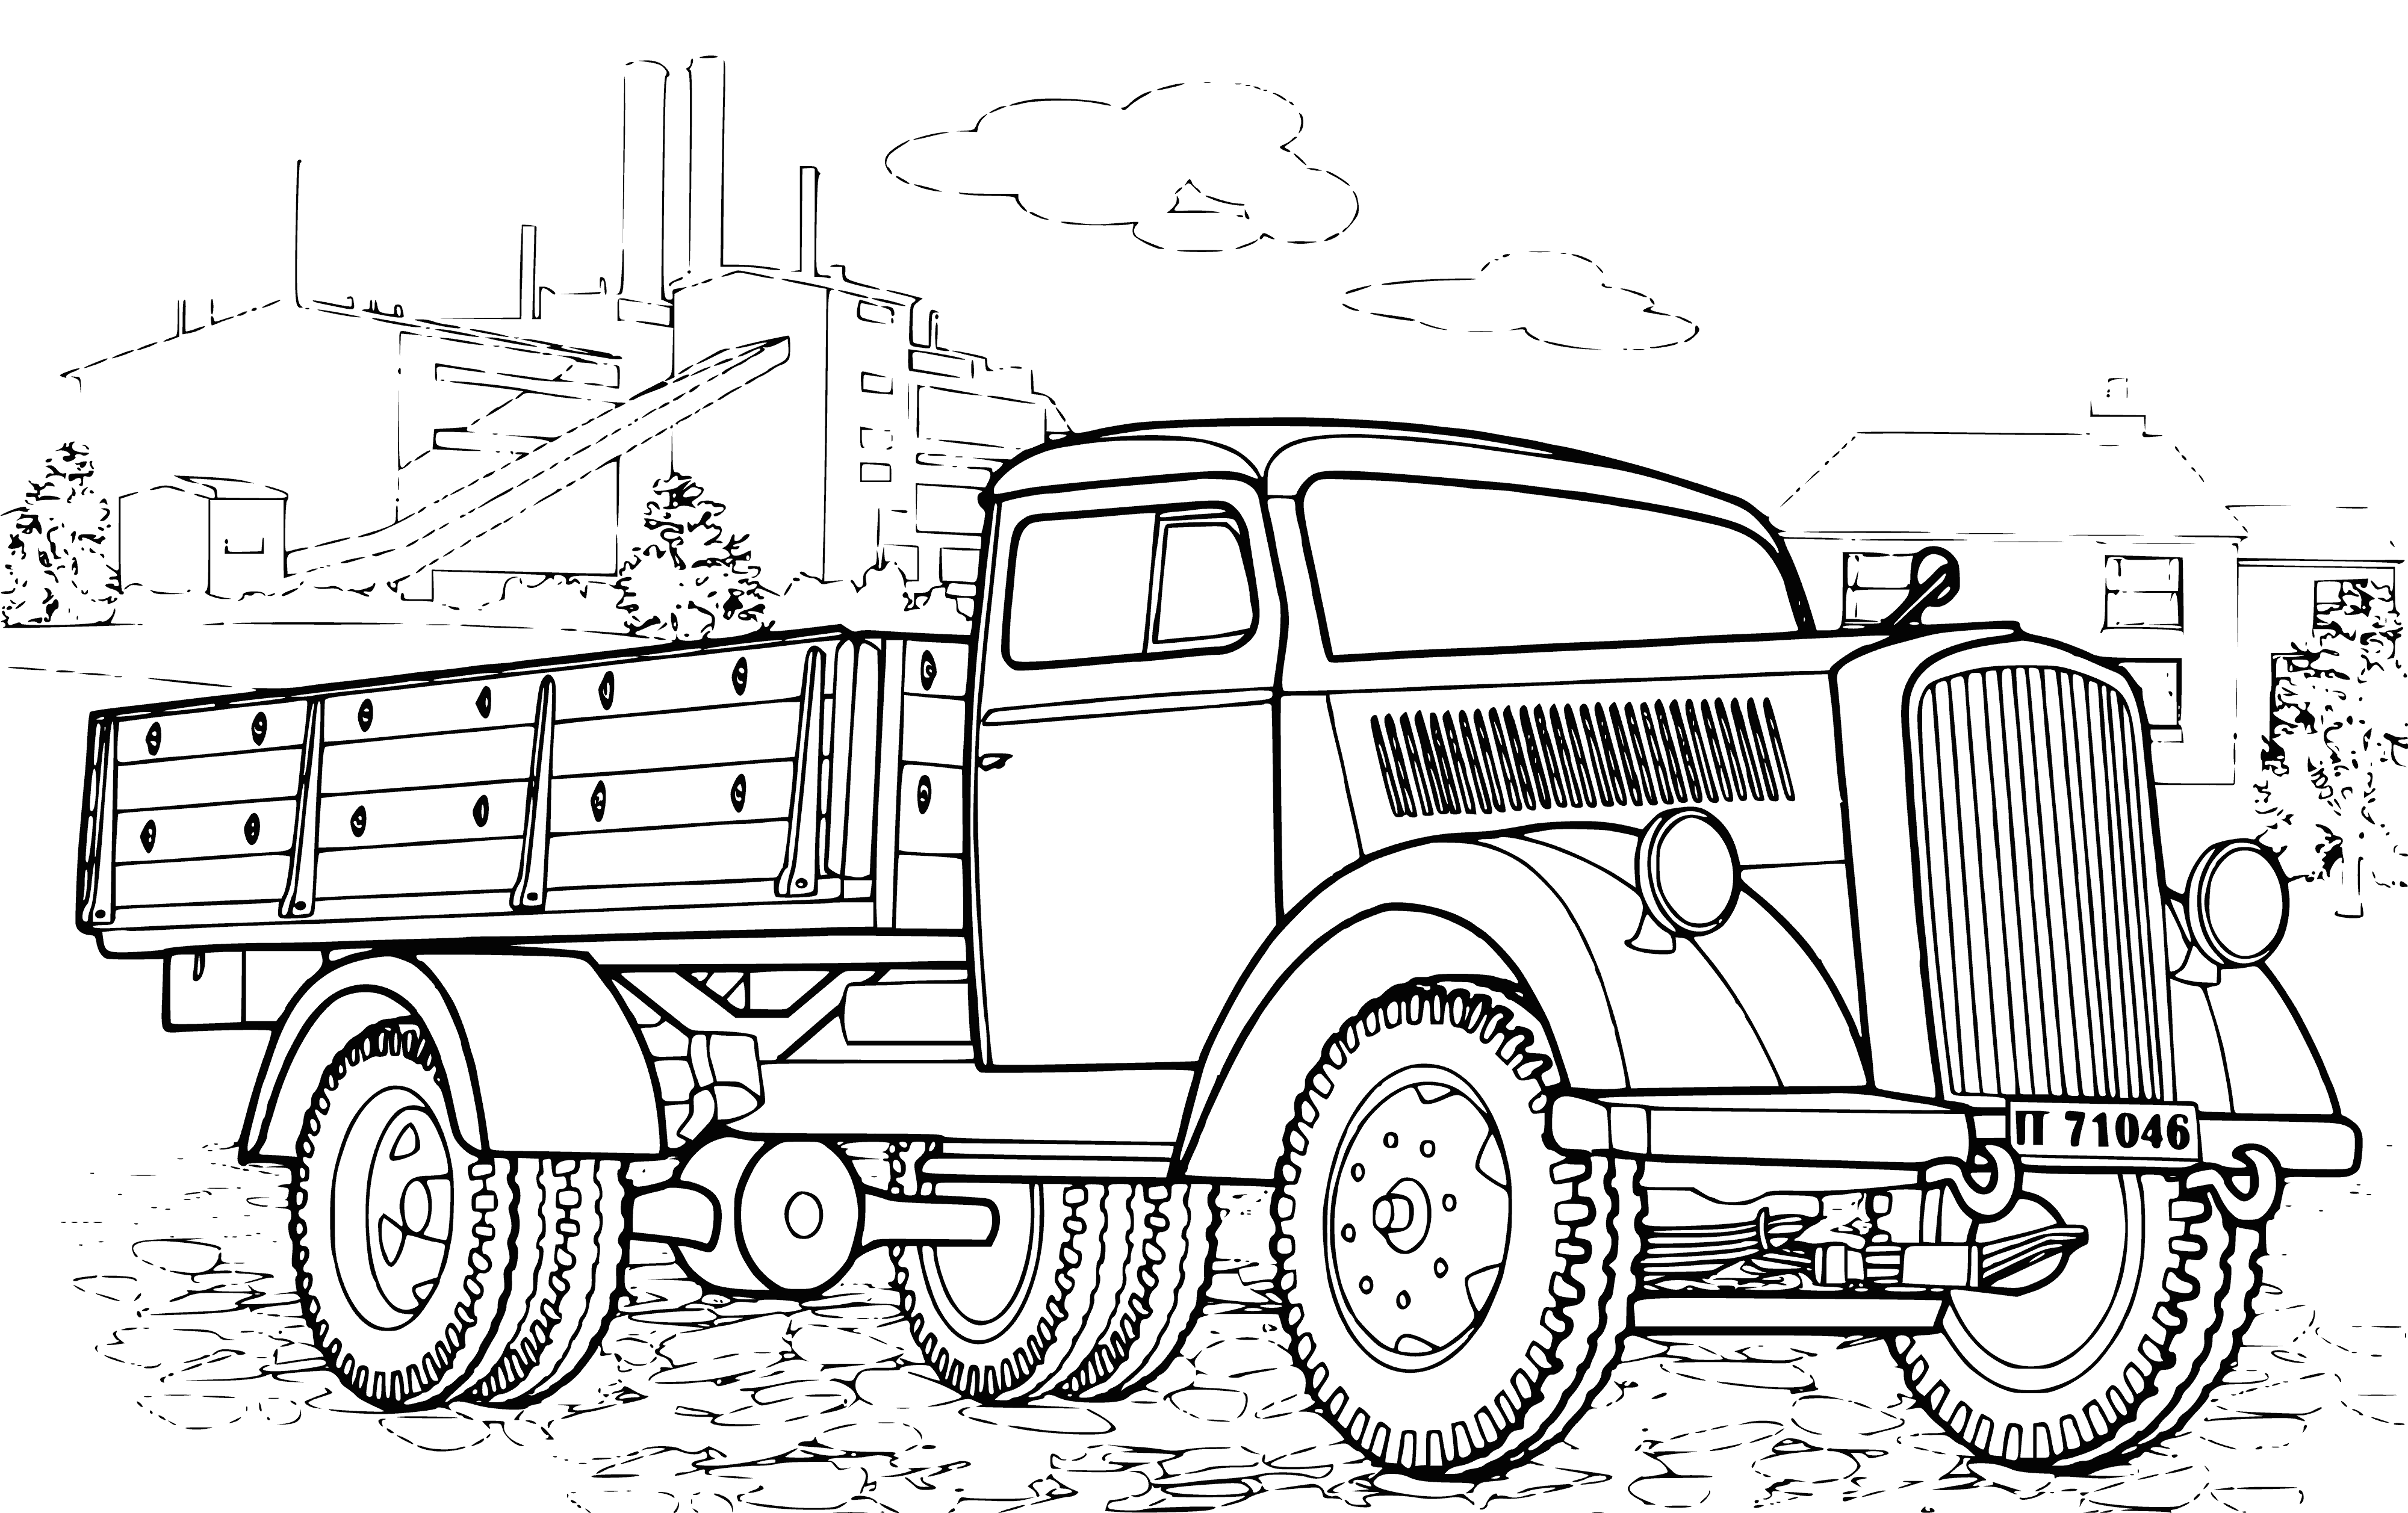 Opel Blitz S3 coloring page